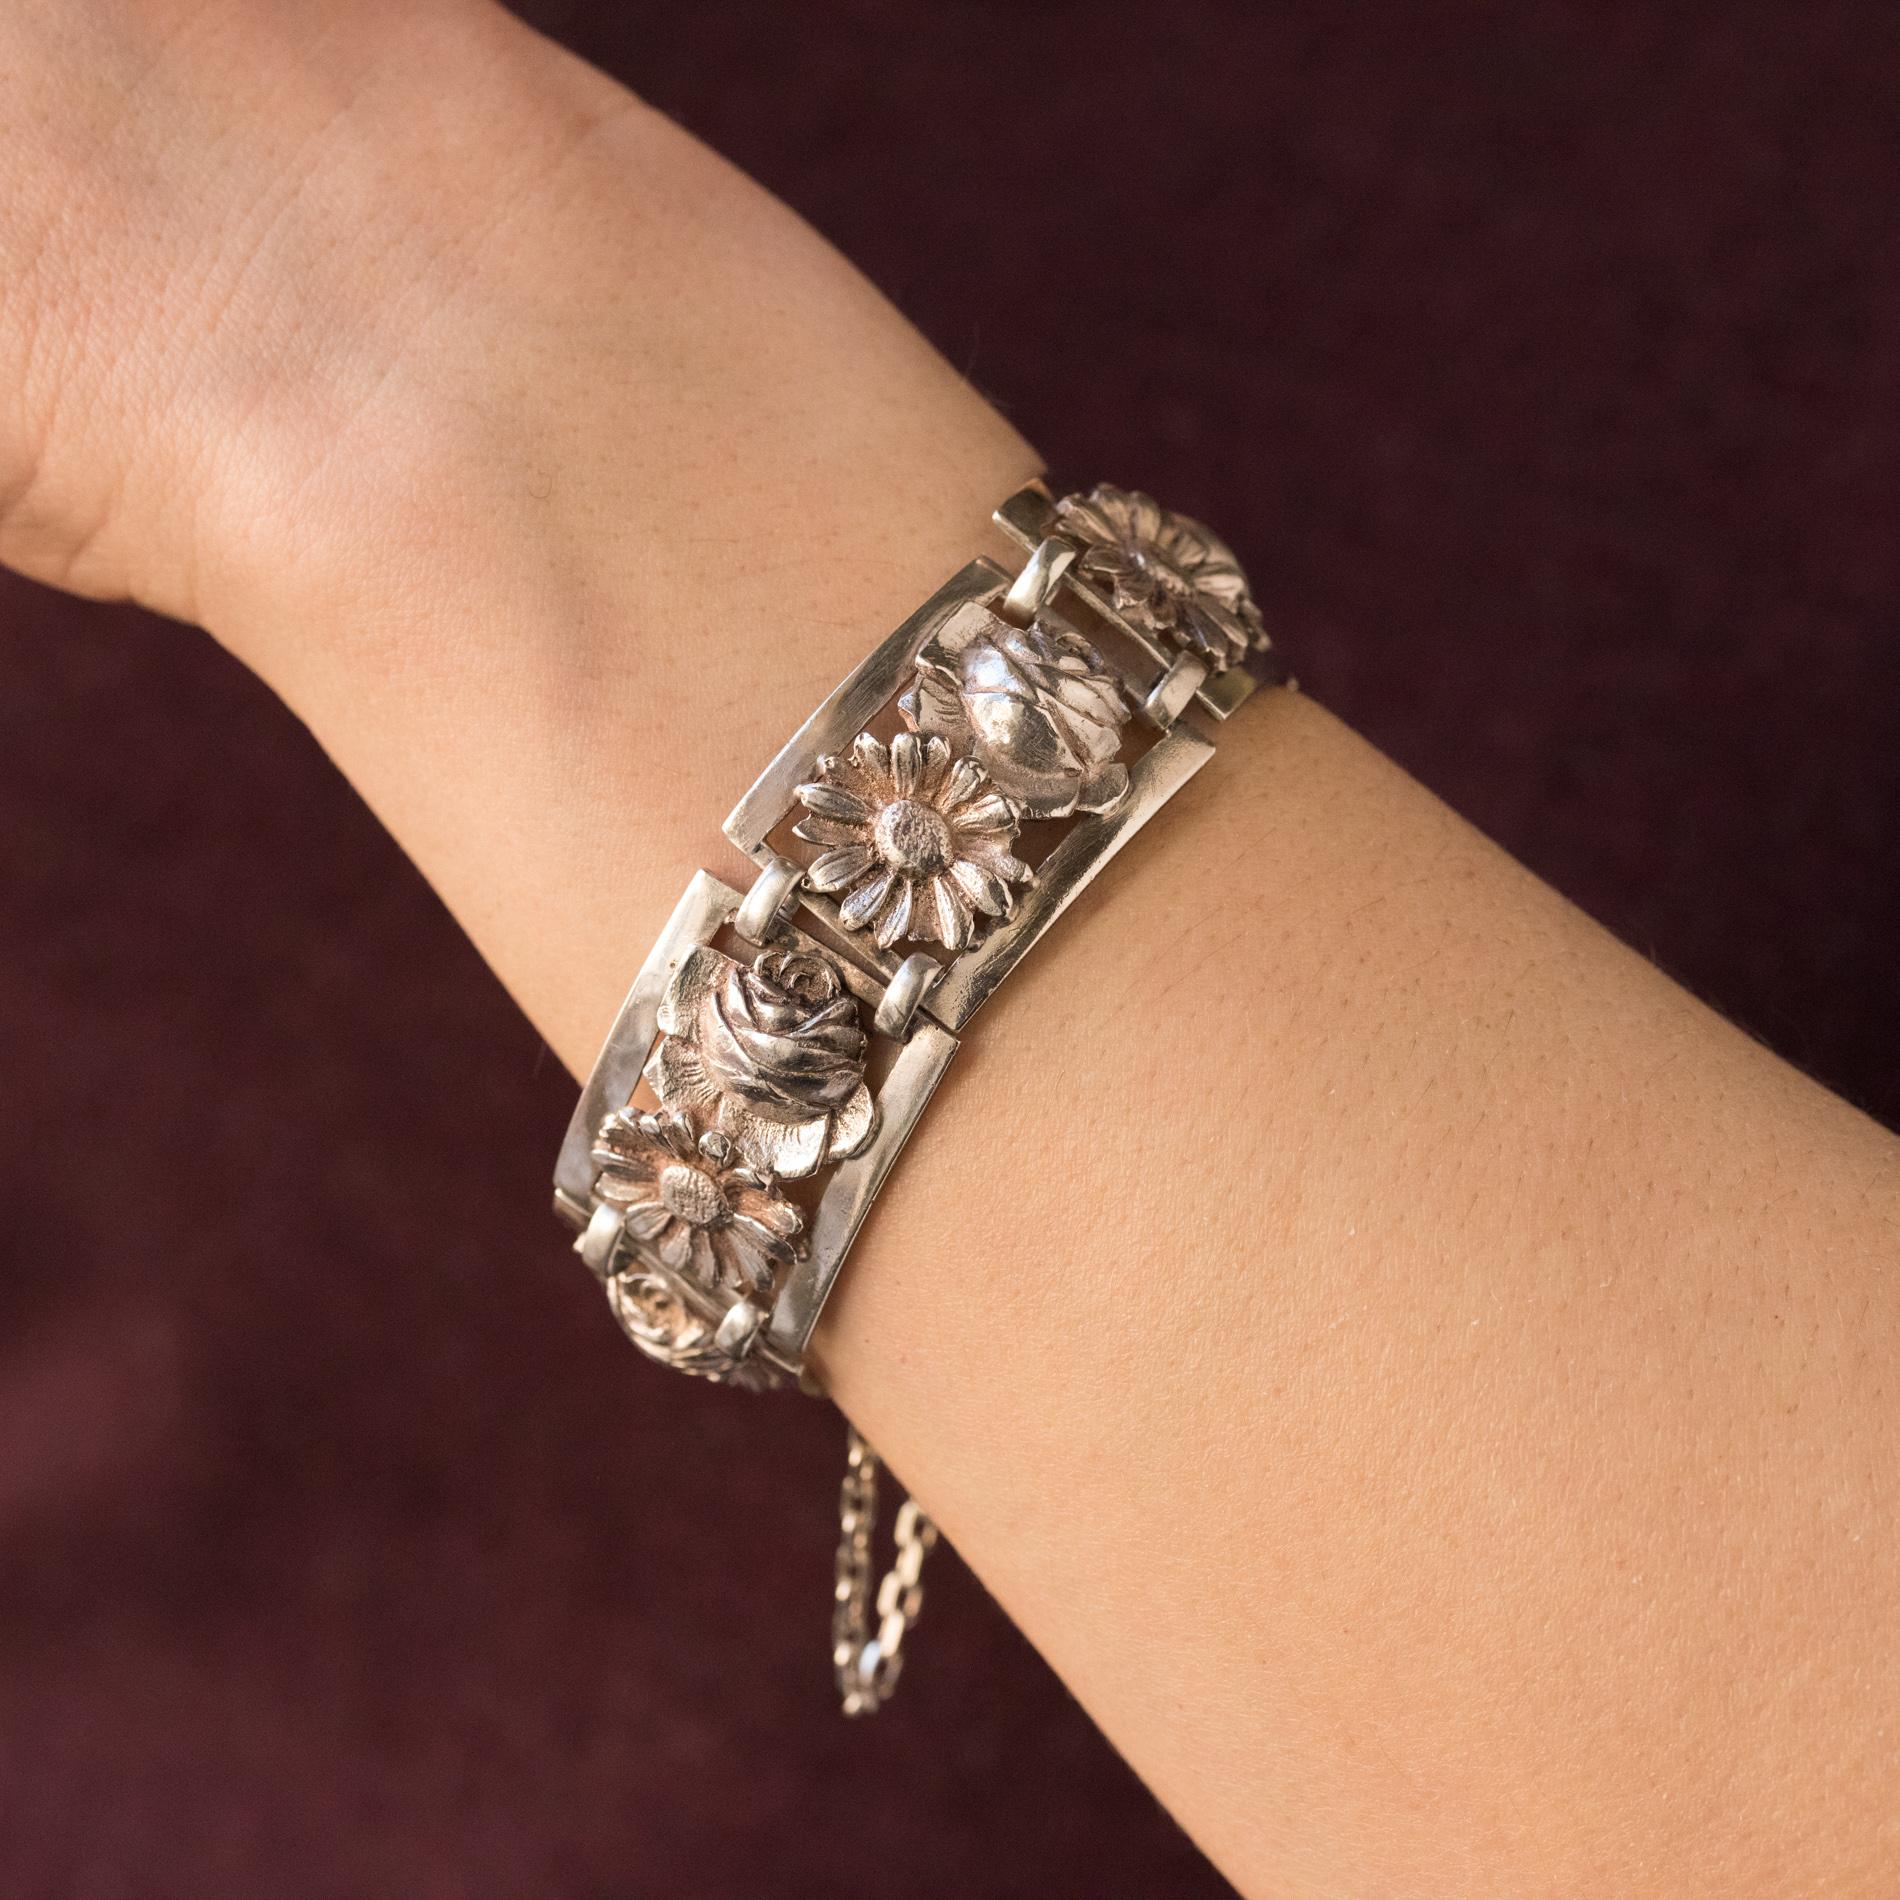 Bracelet in silver, crab hallmark.
Splendid antique bracelet from the early twentieth century, it consists of rectangular patterns each carved with a rose and a daisy and interconnected by two oblong rings. The clasp is an hinged ratchet with safety